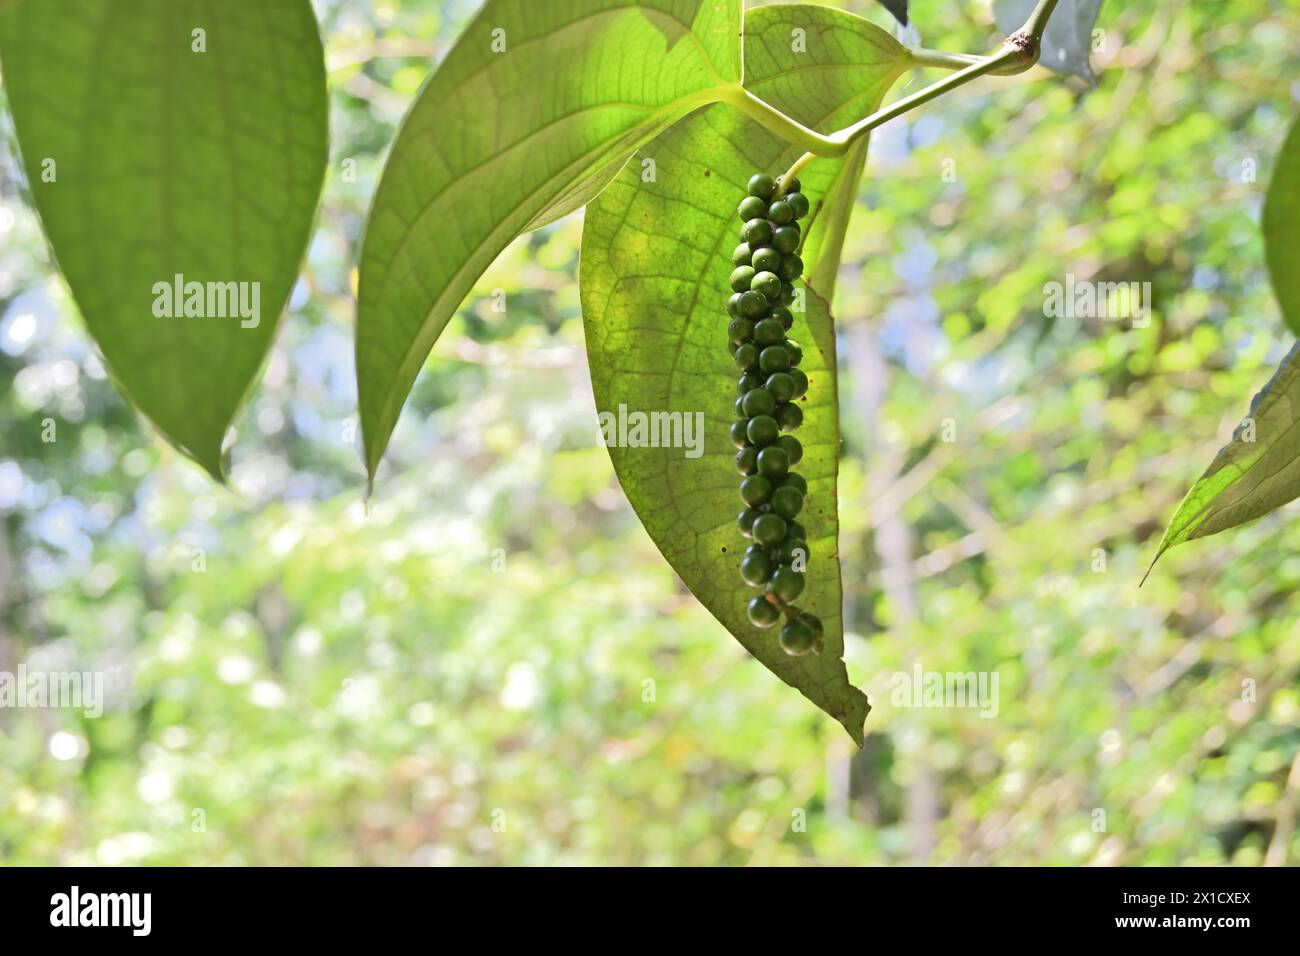 Side view of a Black pepper spike (Piper nigrum) that is not yet ripe and hanging from the vine twig Stock Photo